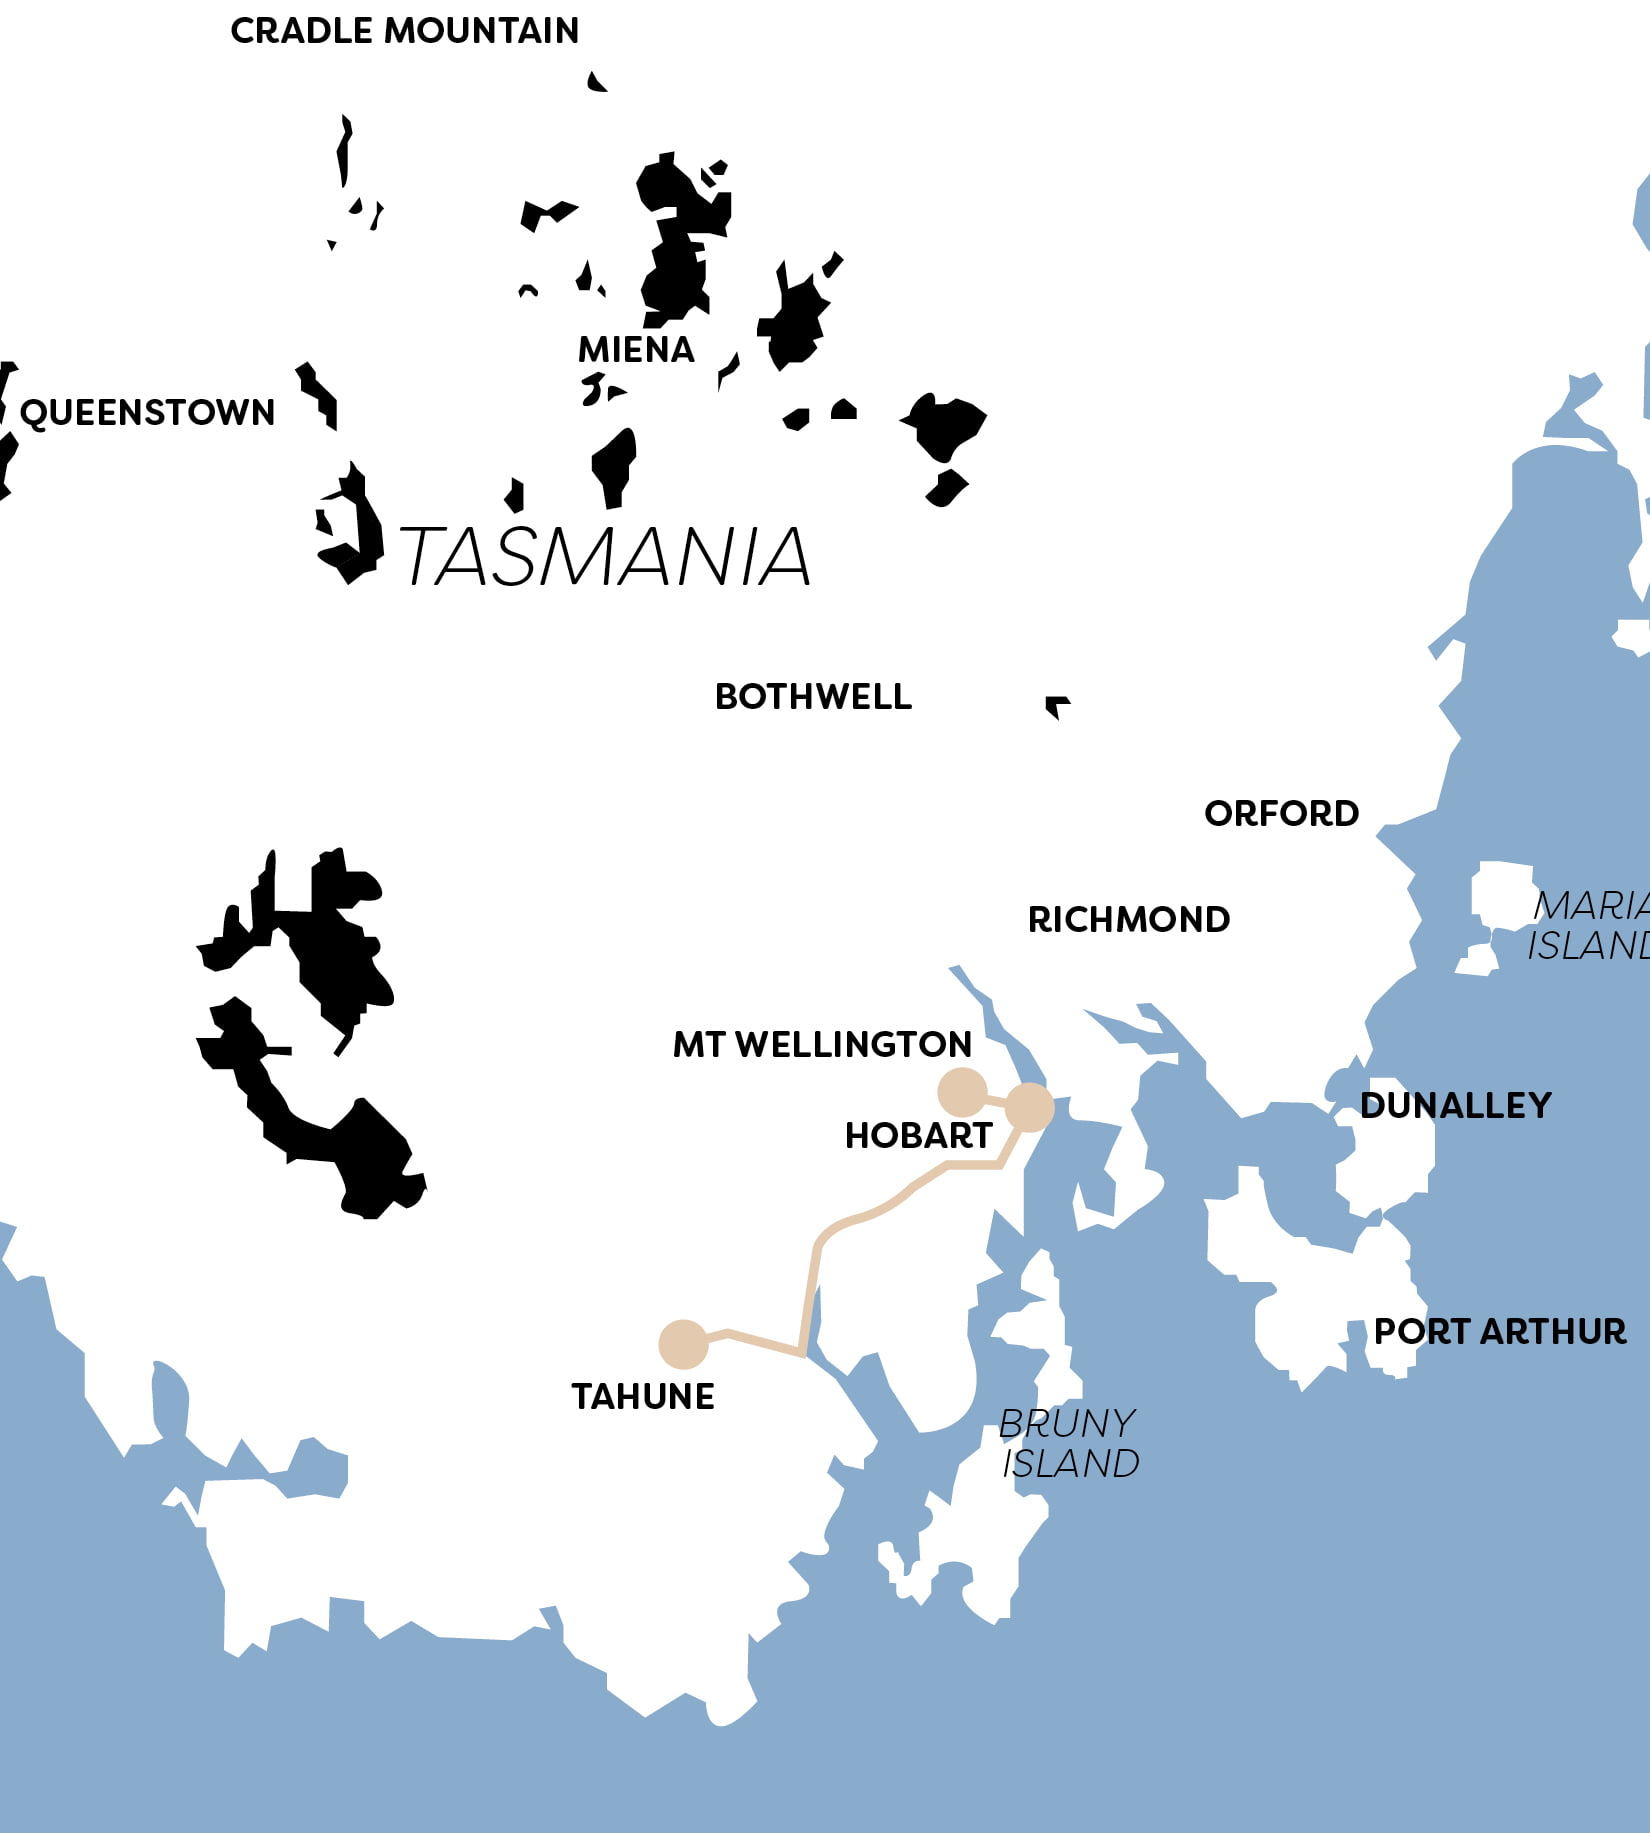 A map showing the destinations of Mt Wellington and Tahune